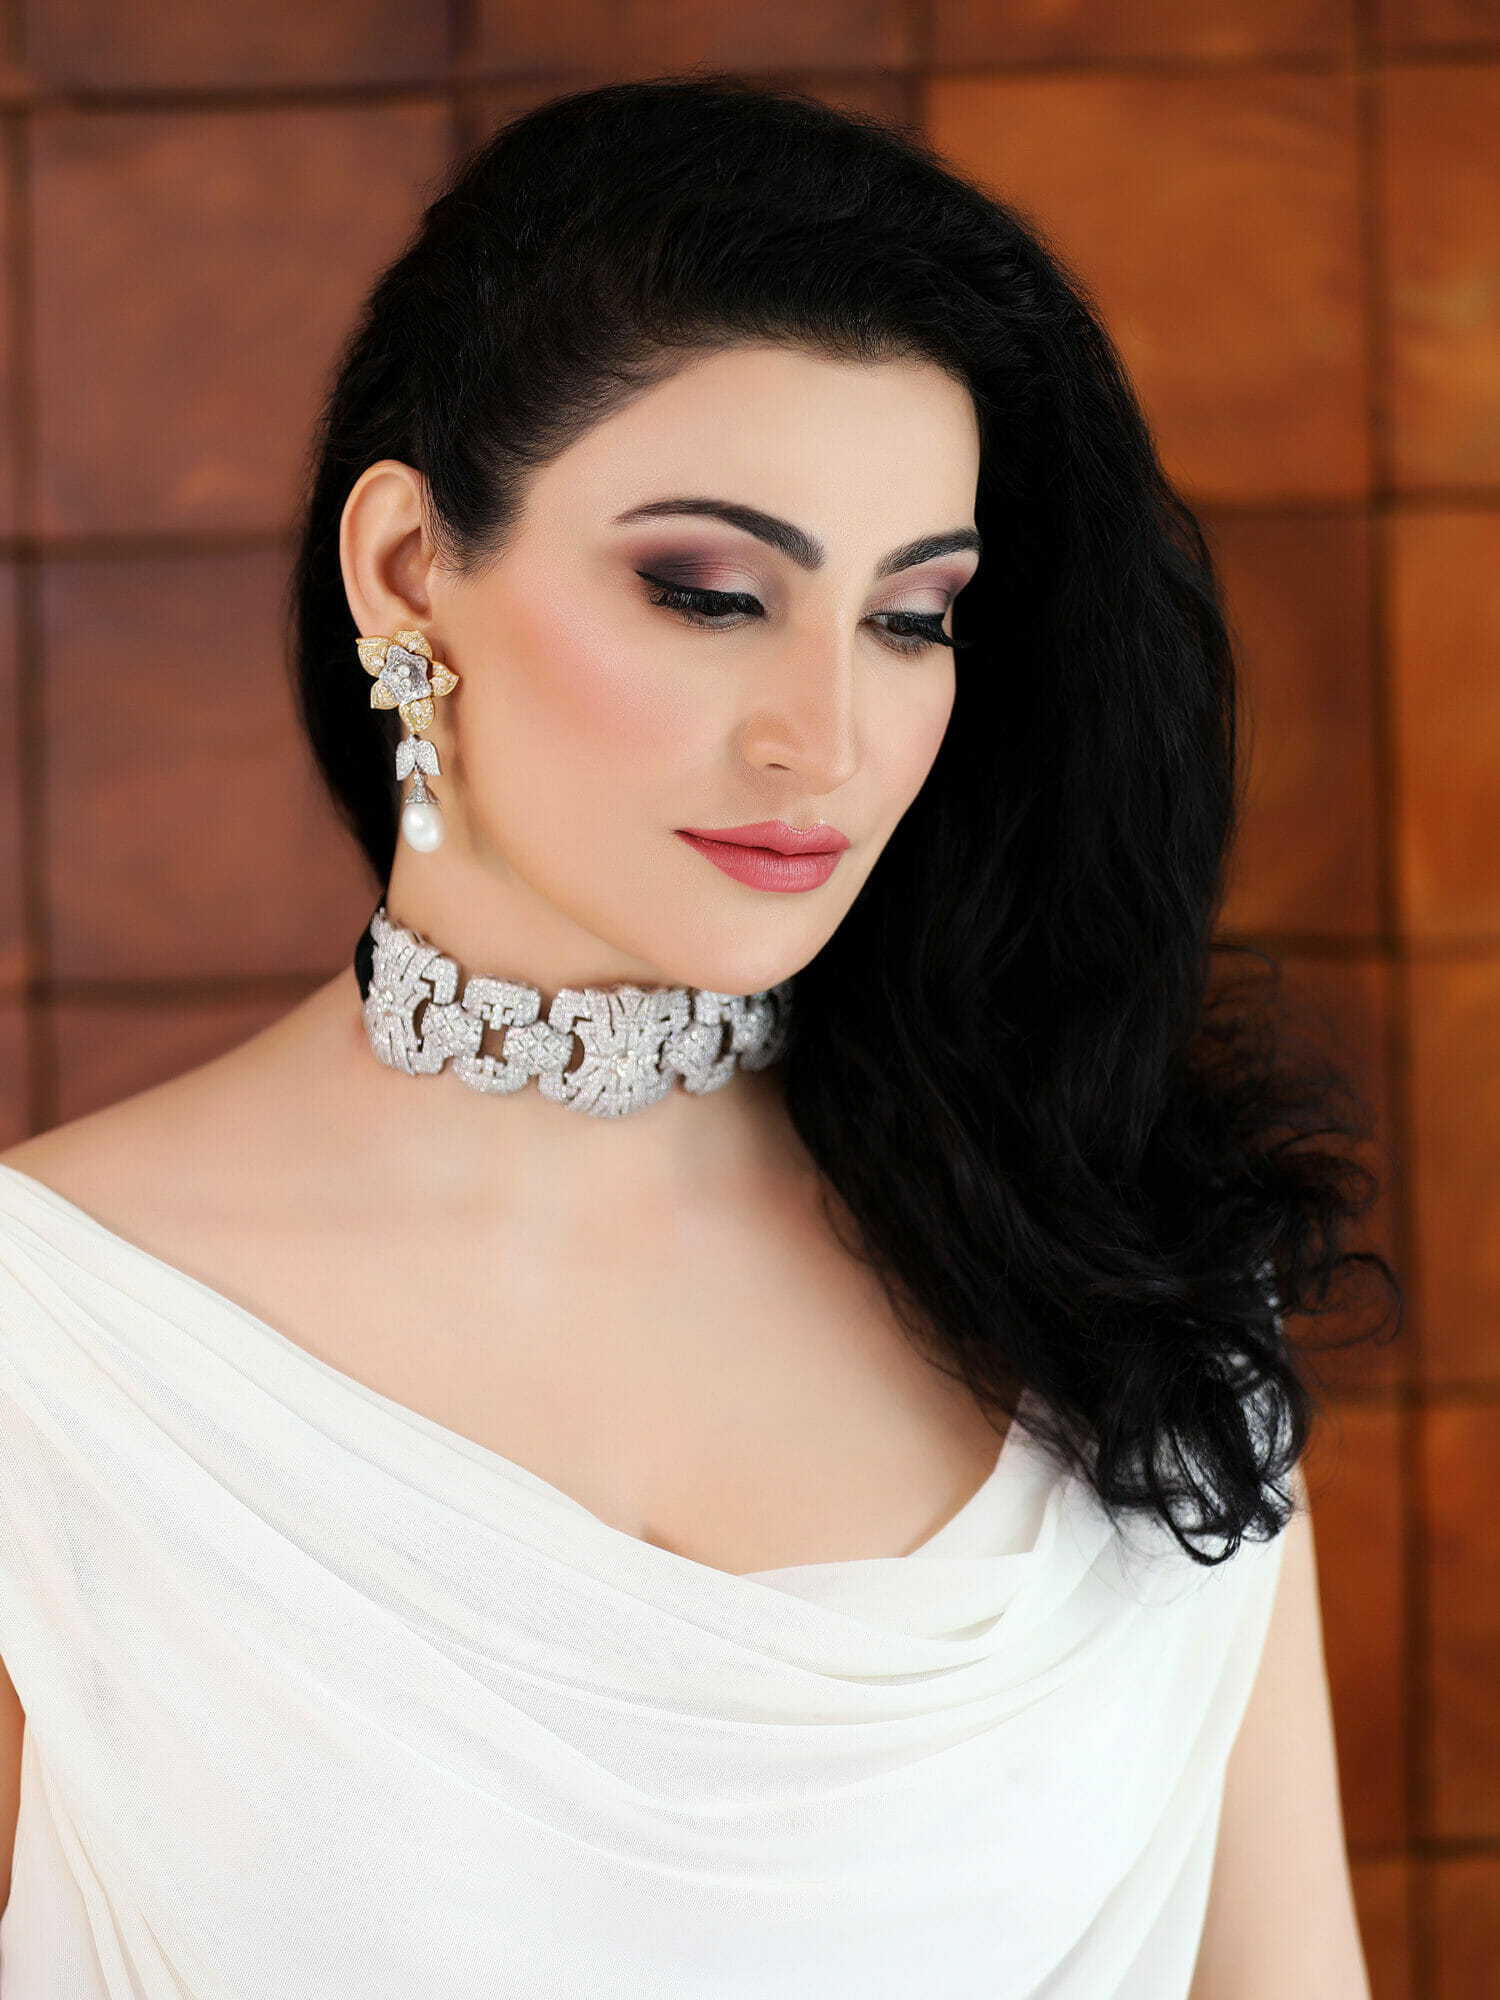 Passi pairs her stunning white diamond choker in the Art Deco style with equally gorgeous diamond earrings from her personal jewellery collection